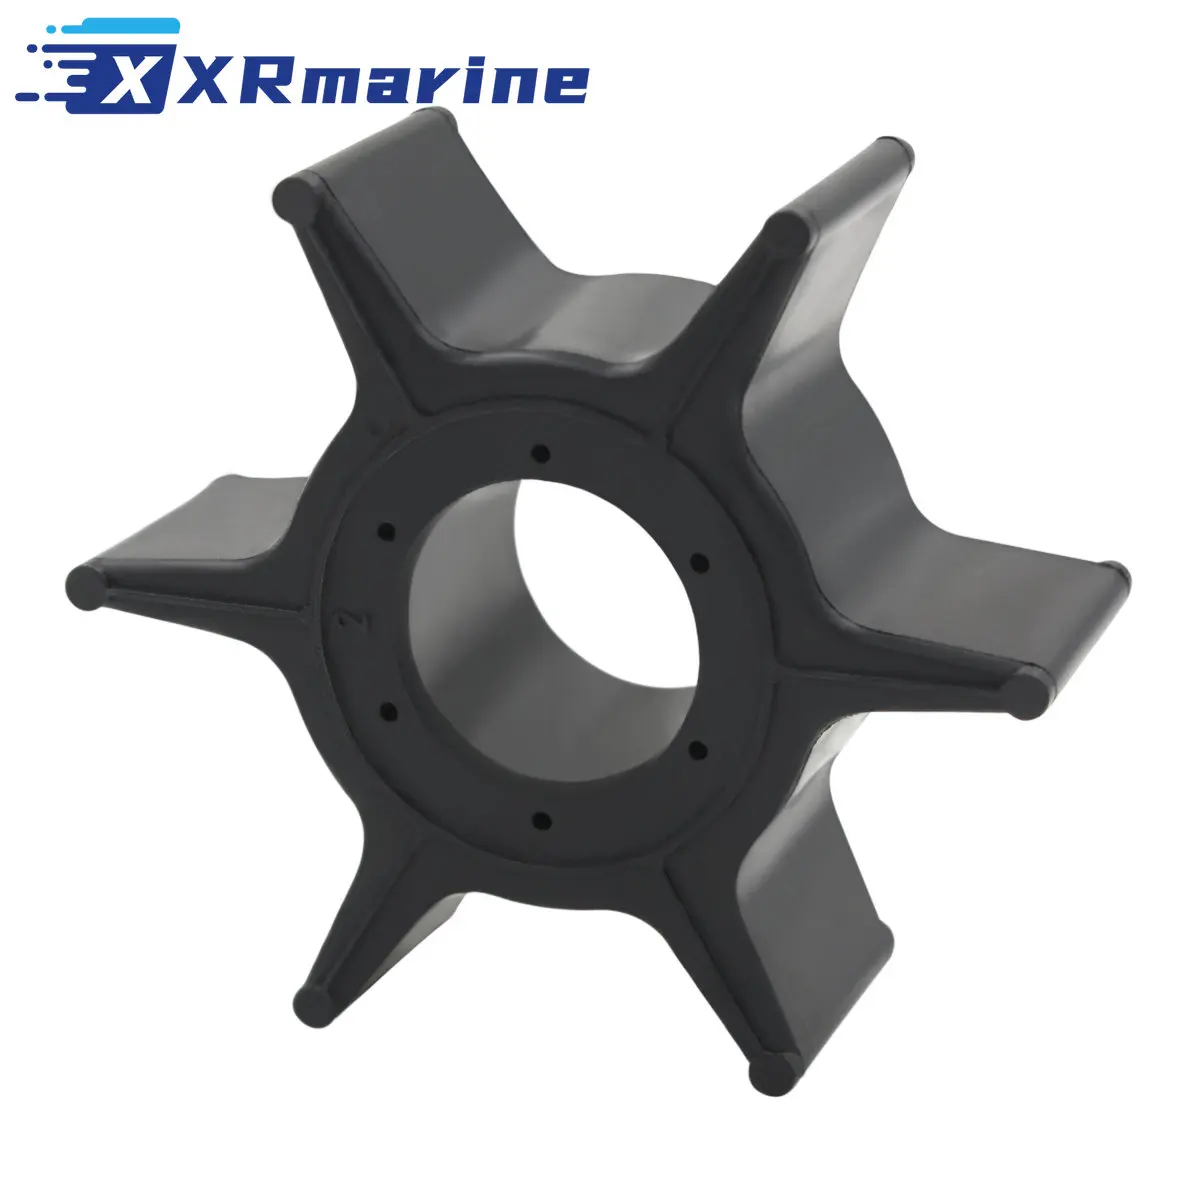 Water Pump Impeller 19210-ZV7-003 for Honda Marine Outboard BF25A BF25D BF30A BF30D 25HP 30HP Motors Replaces 18-3249 water pump impeller 47 89983t for mercury outboard boat motors 47 20268 47 65959 47 89983 18 3007